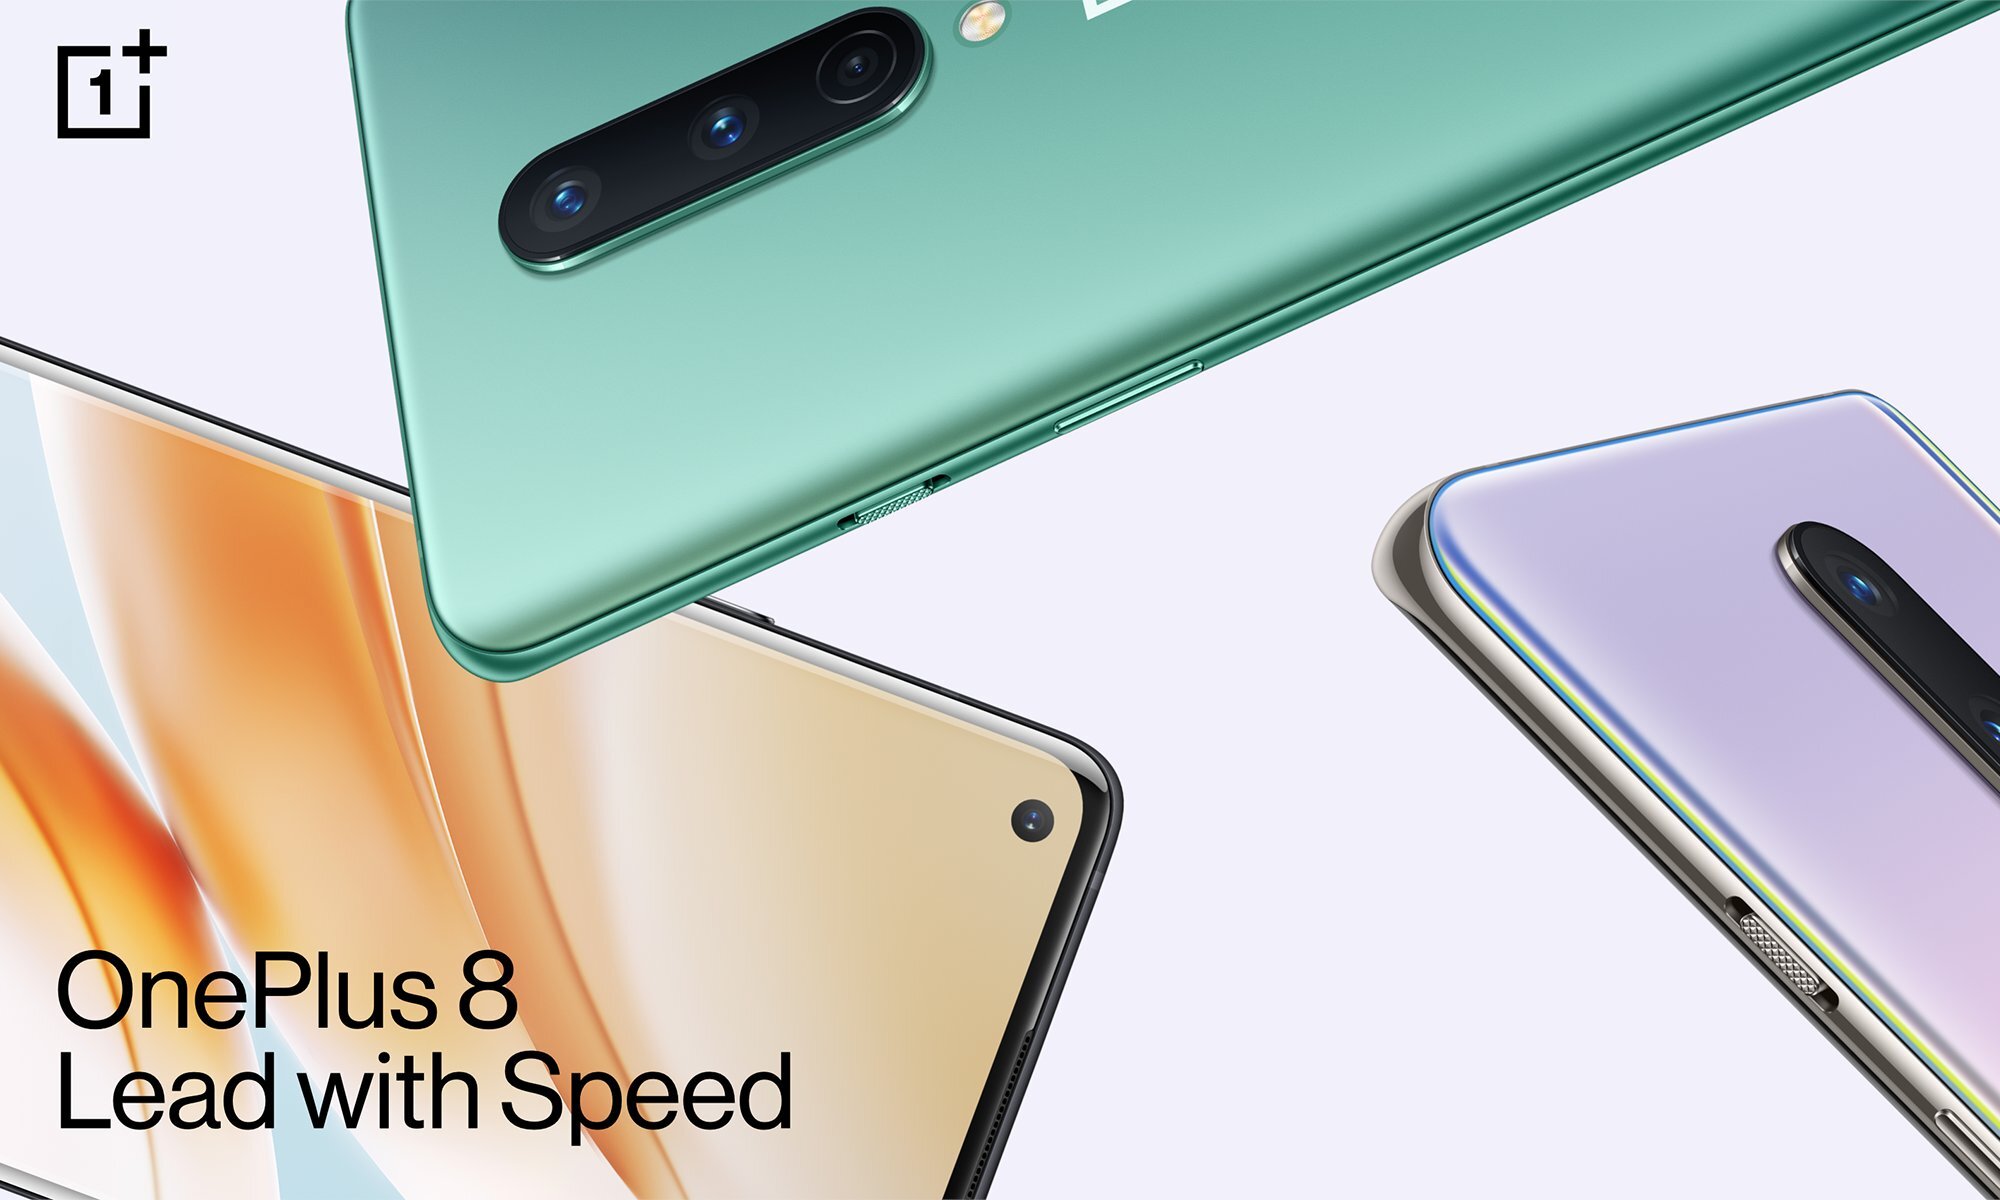 OnePlus 8 & 8 Pro Launched with Snapdragon 865 SoC, 5G & 120Hz Display